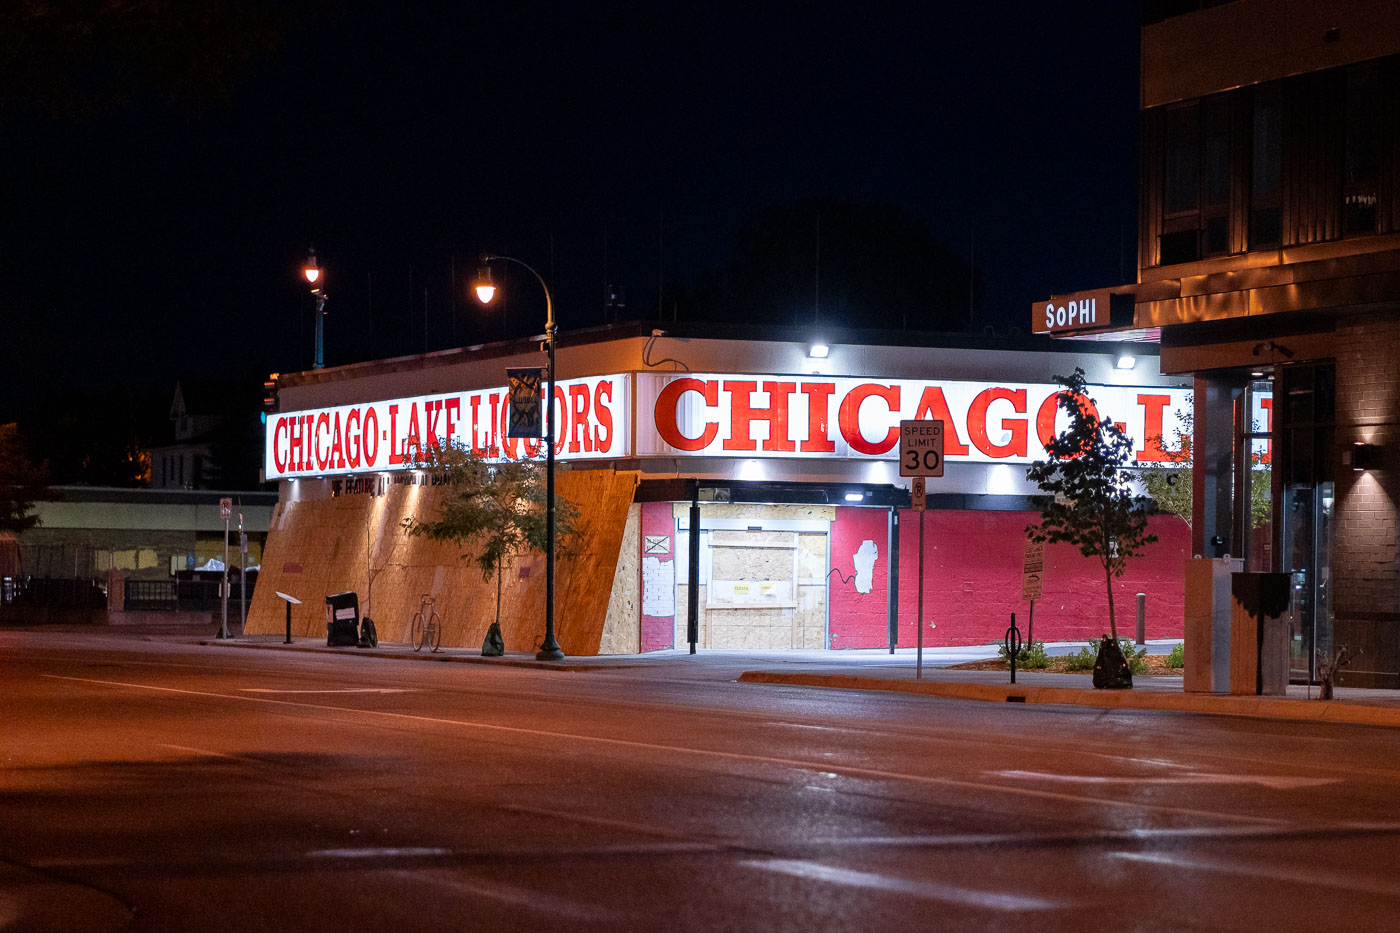 Chicago Lake Liquor store with boards over windows